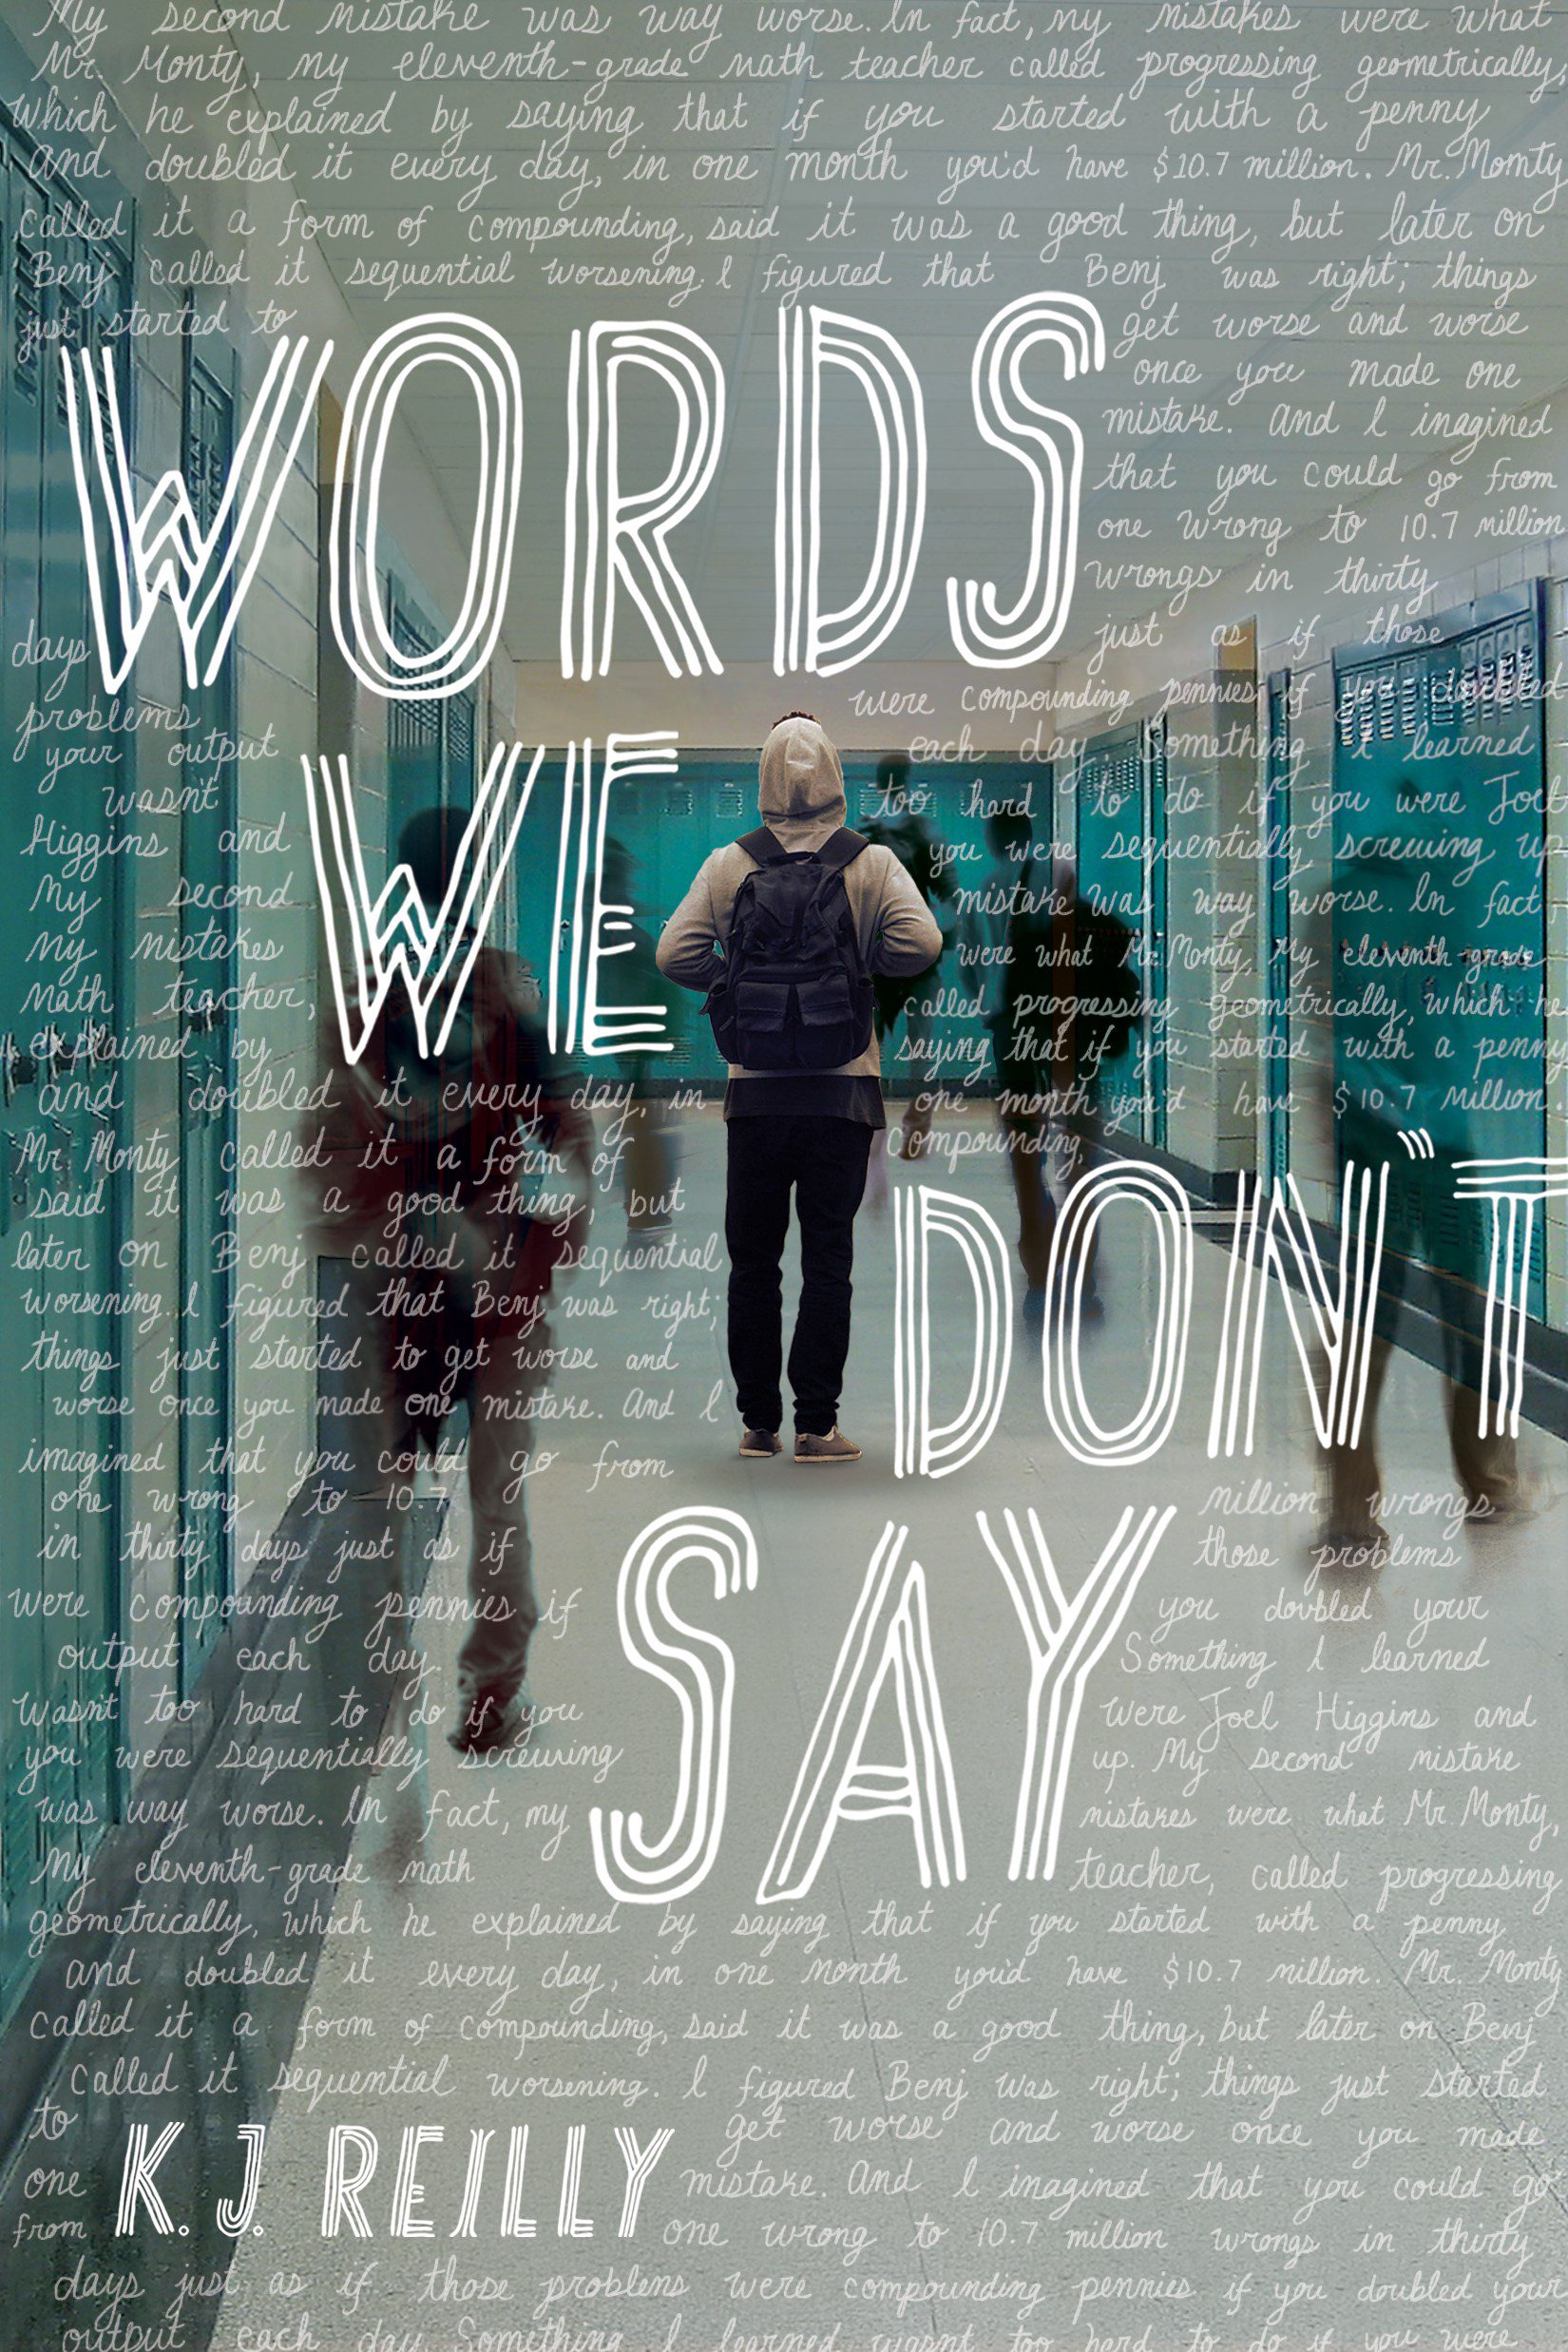 Words We Don't Say